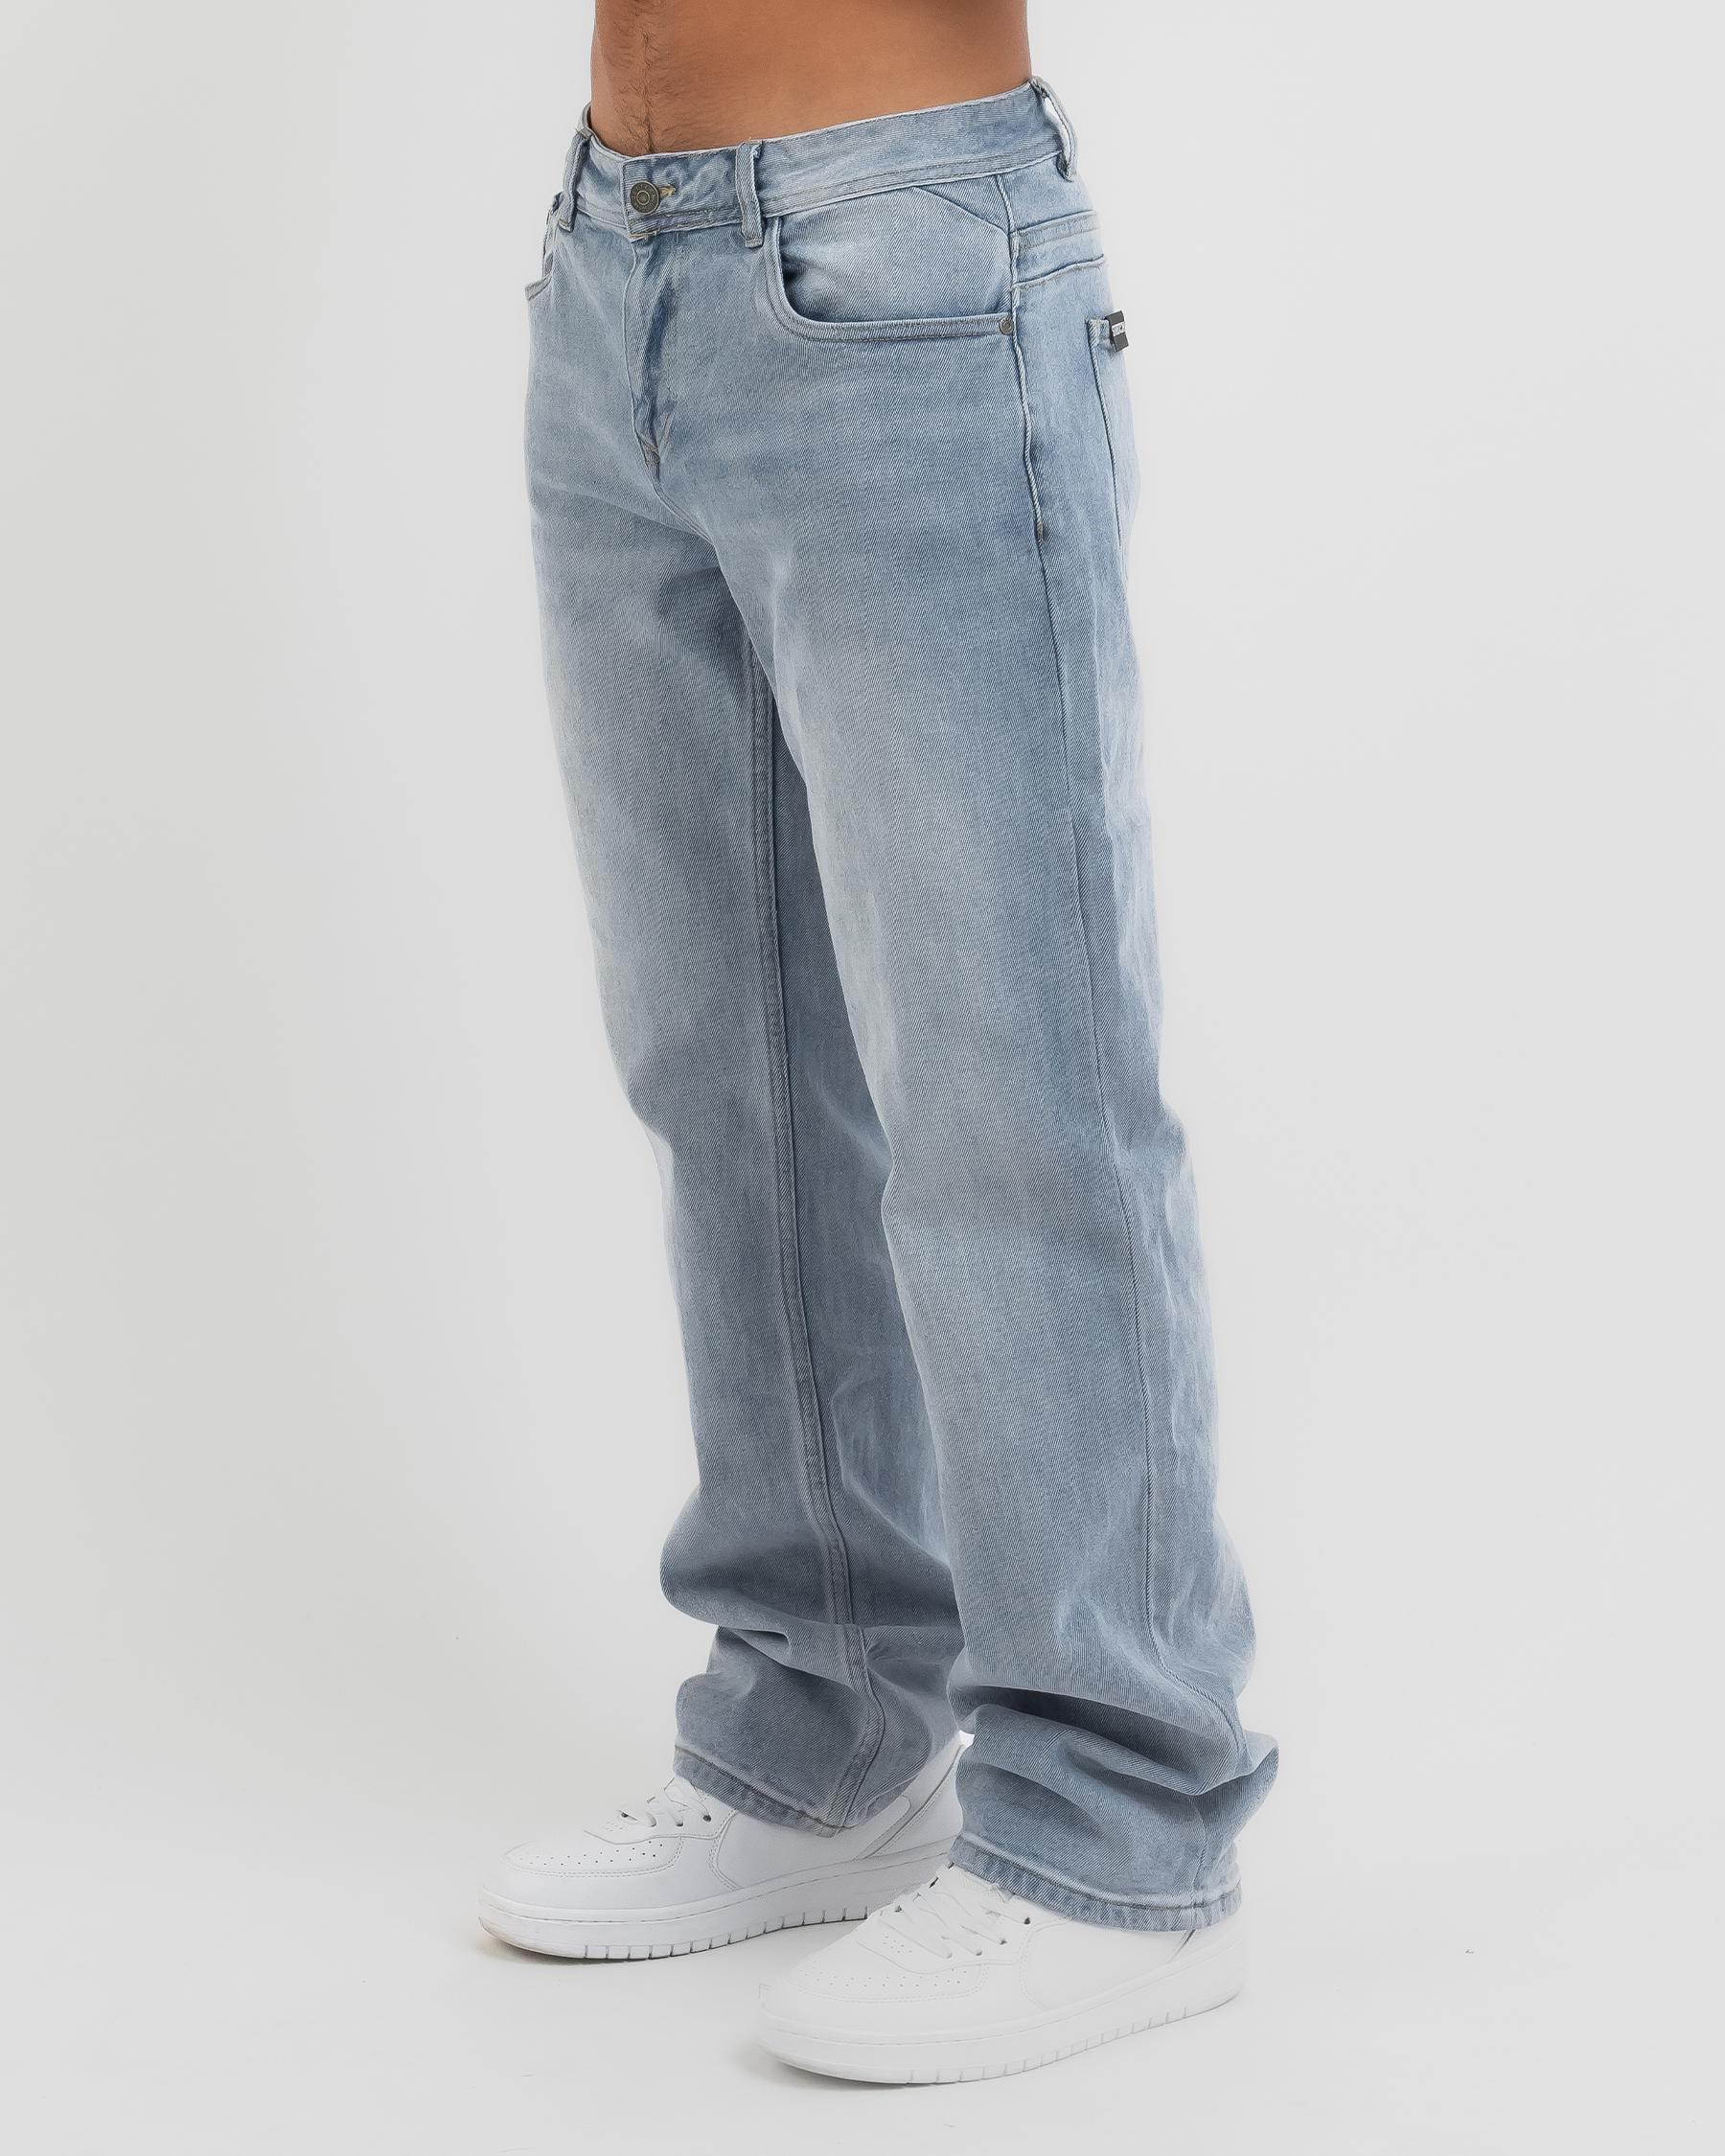 Shop Dexter Impact Jeans In Pale Blue - Fast Shipping & Easy Returns ...